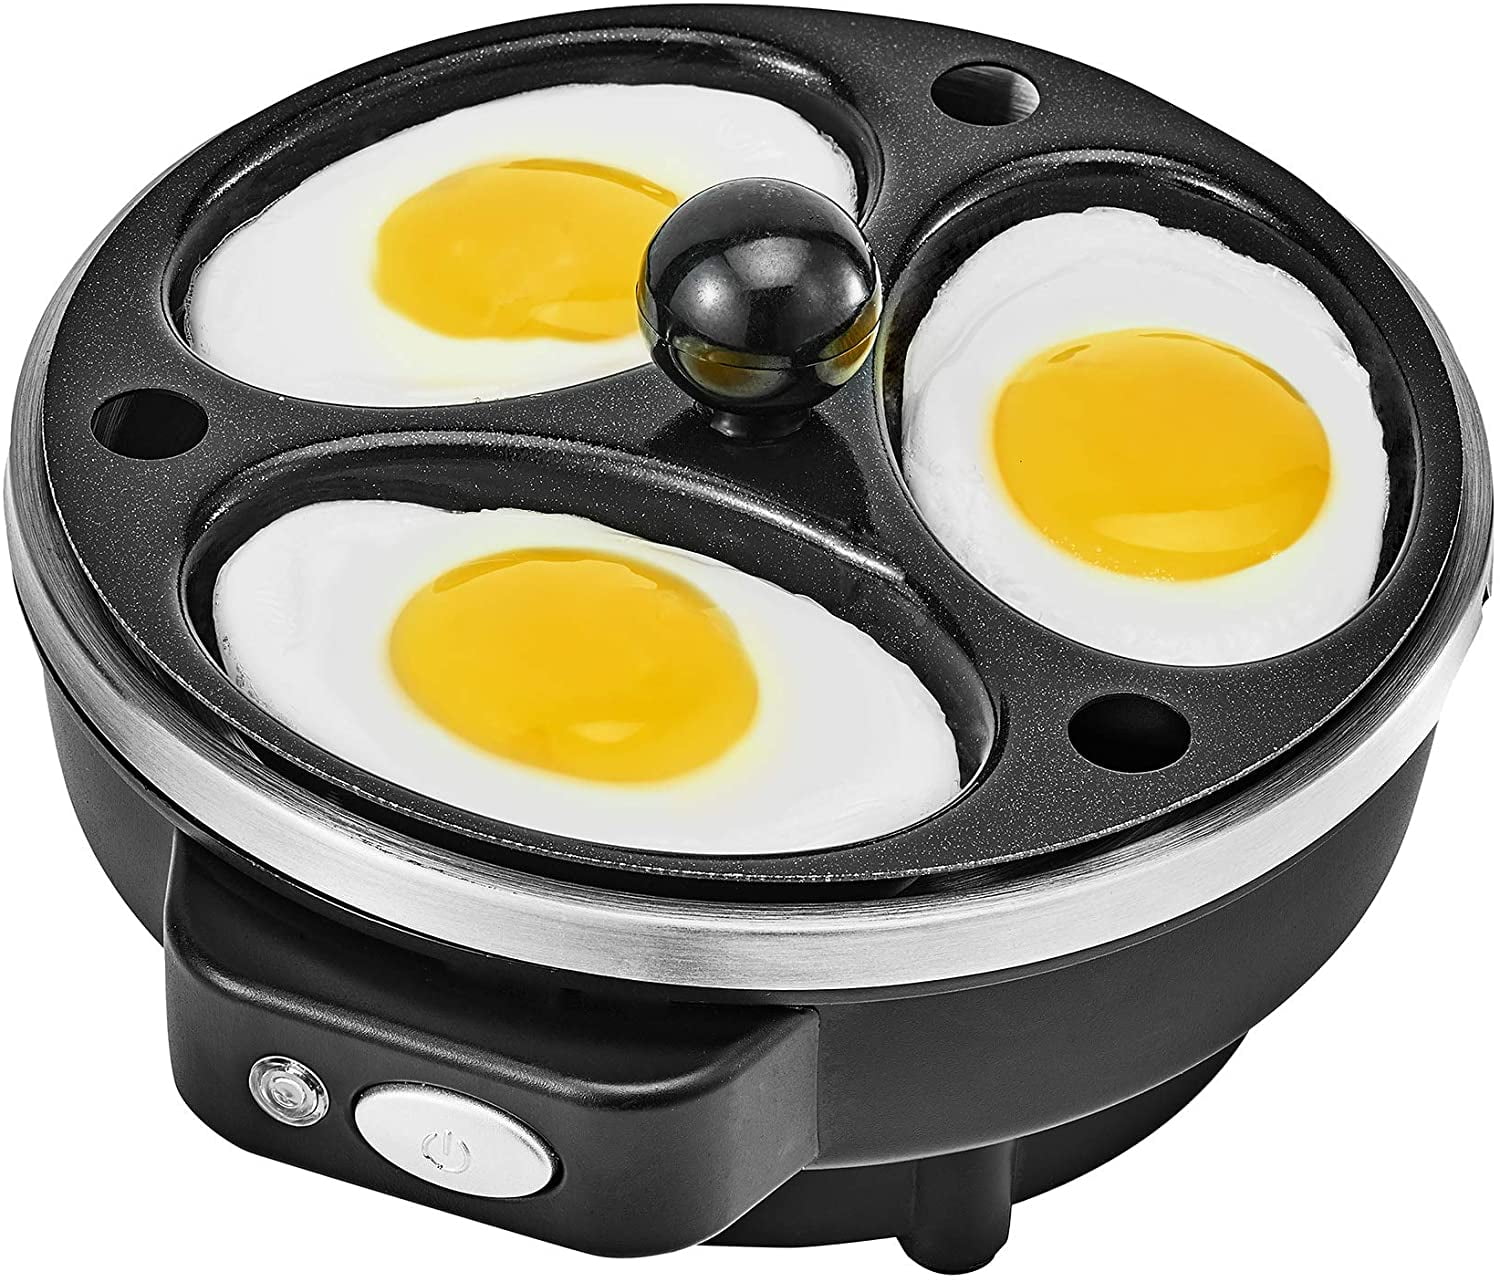 Rollie , Electric Egg Cooker, Vertical egg maker, Easy , fast breakfast.  Poached Eggs, Scrambled Eggs, or Omelets – KITCHENELL